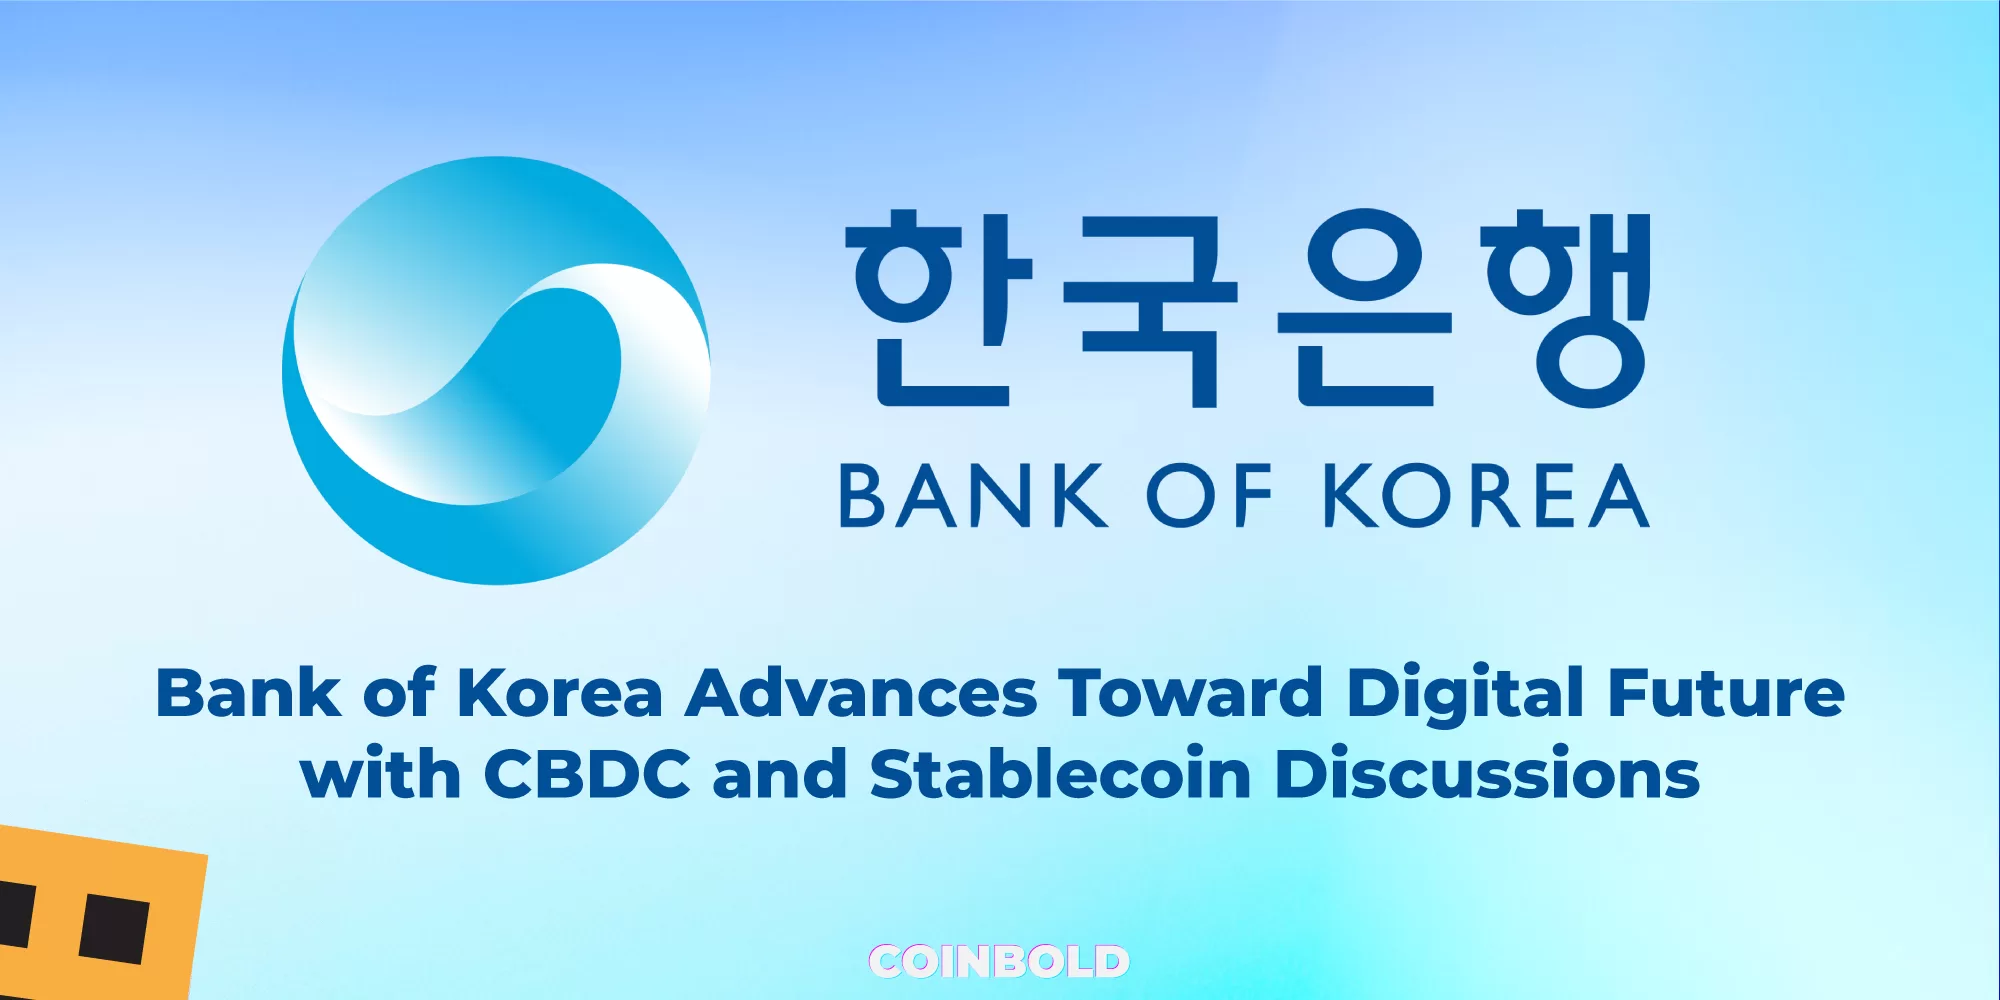 Bank of Korea Advances Toward Digital Future with CBDC and Stablecoin Discussions